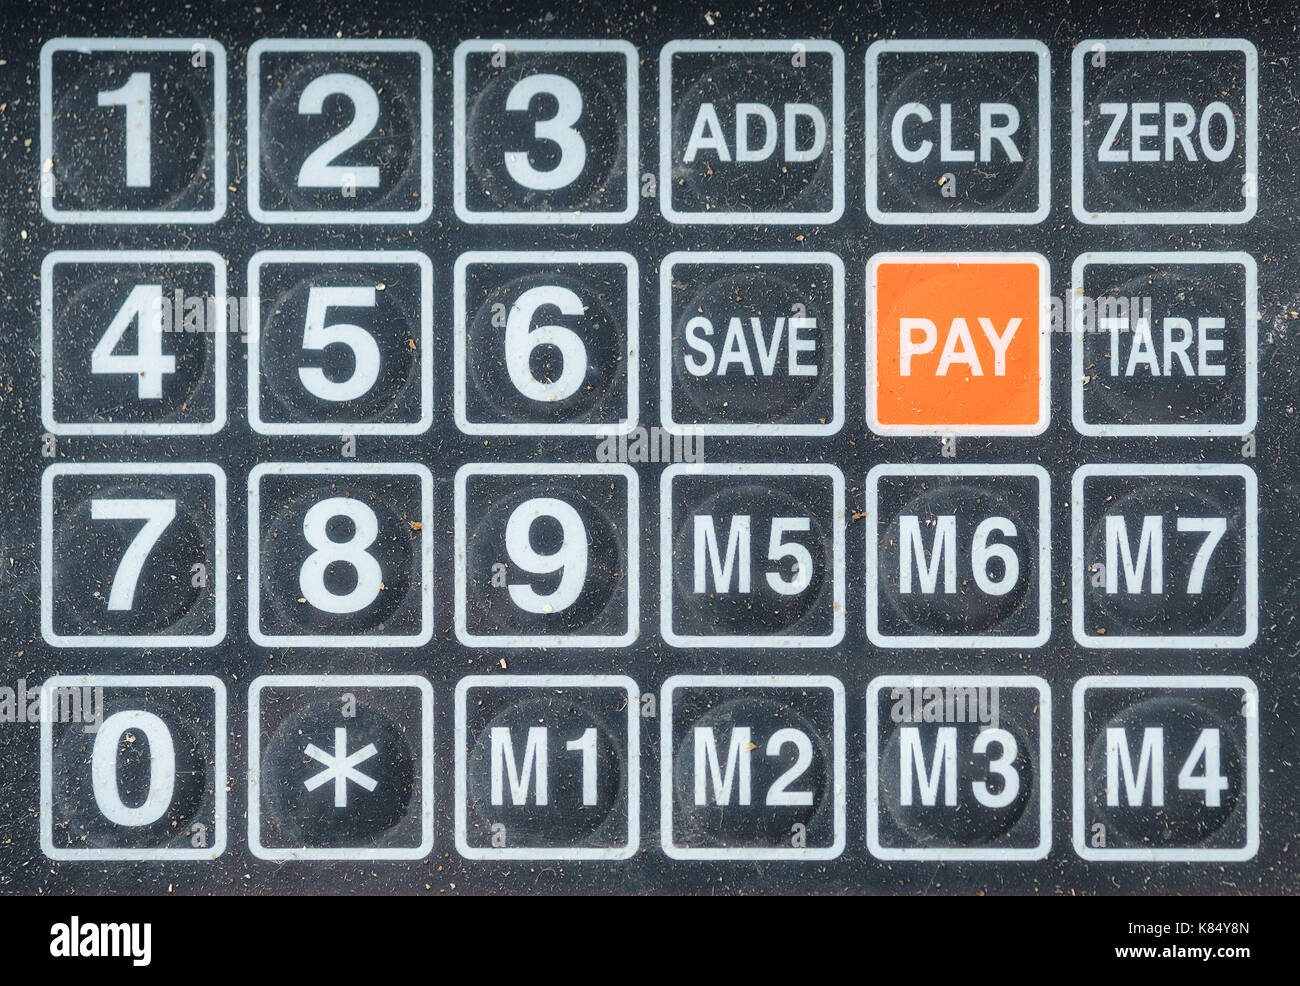 Numeric keys on digital scale, retail shop and grocery Stock Photo